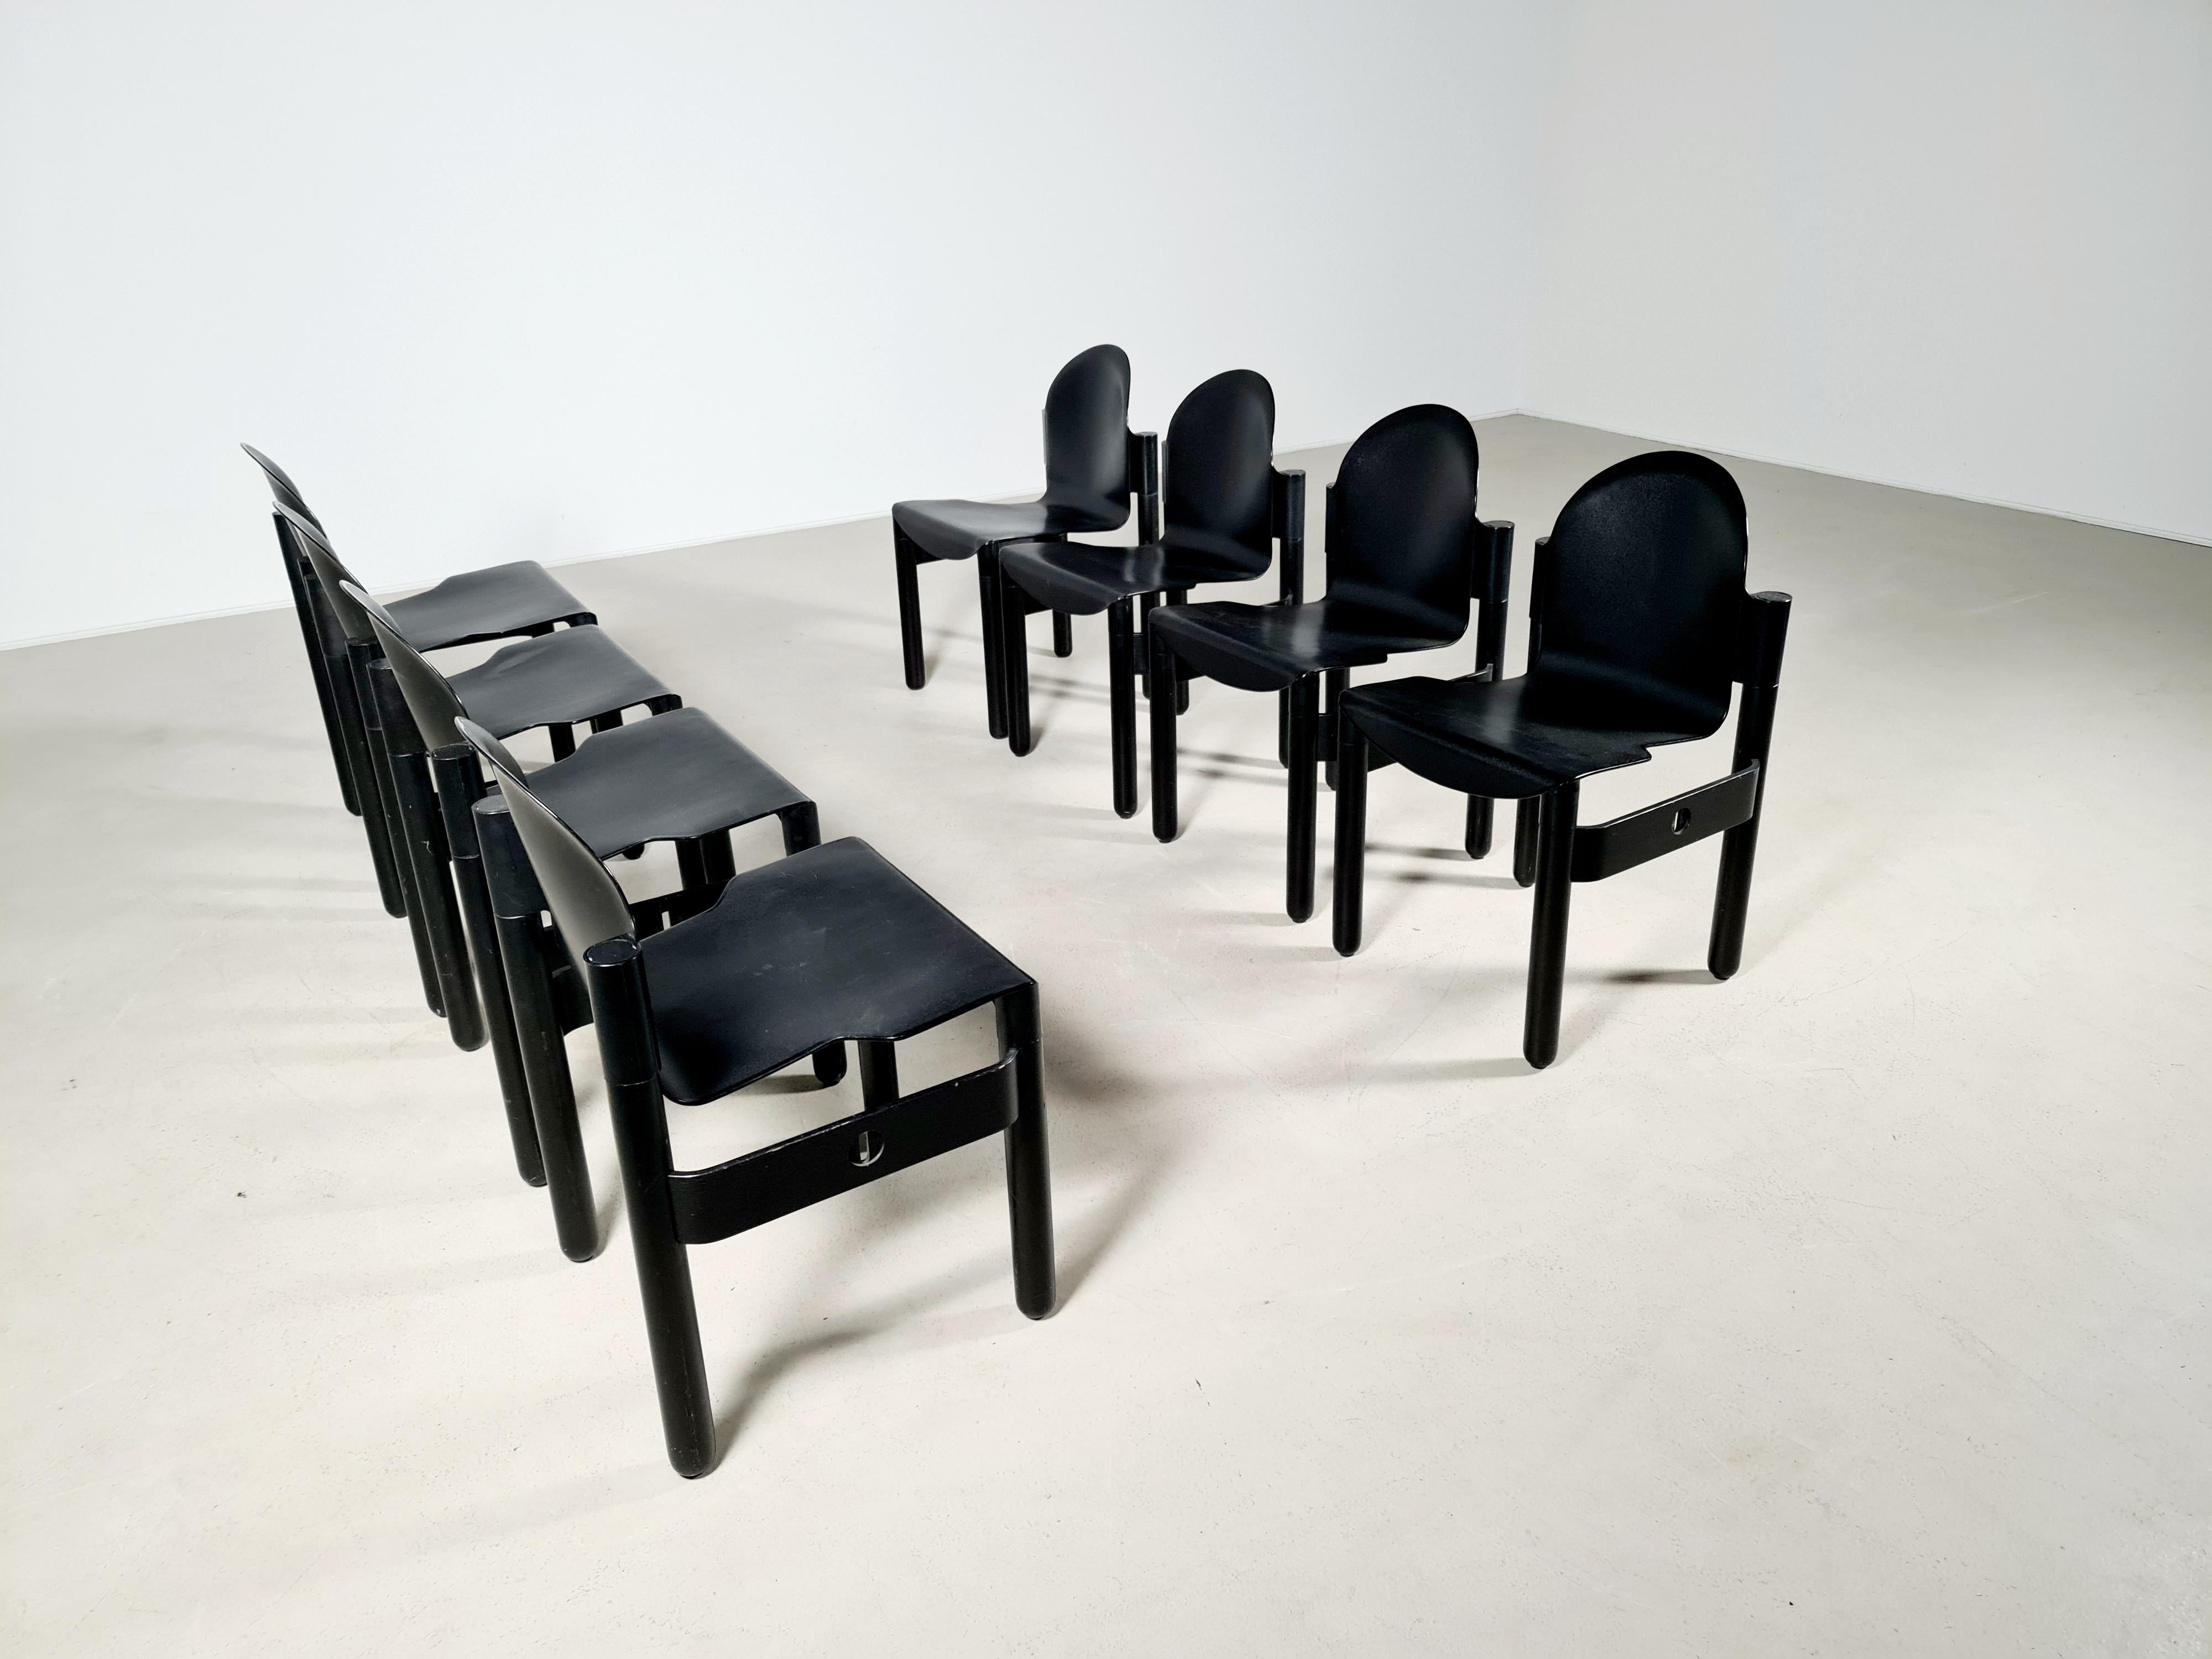 Set of 8 chairs designed by Gert De Lange and made by Thornet, the chair was call ''The Flex'' chair and was awarded the 'Gute Form' price in 1969, black beech frame and black synthetic seat Manufacturer’s mark. Lovely original very comfortable